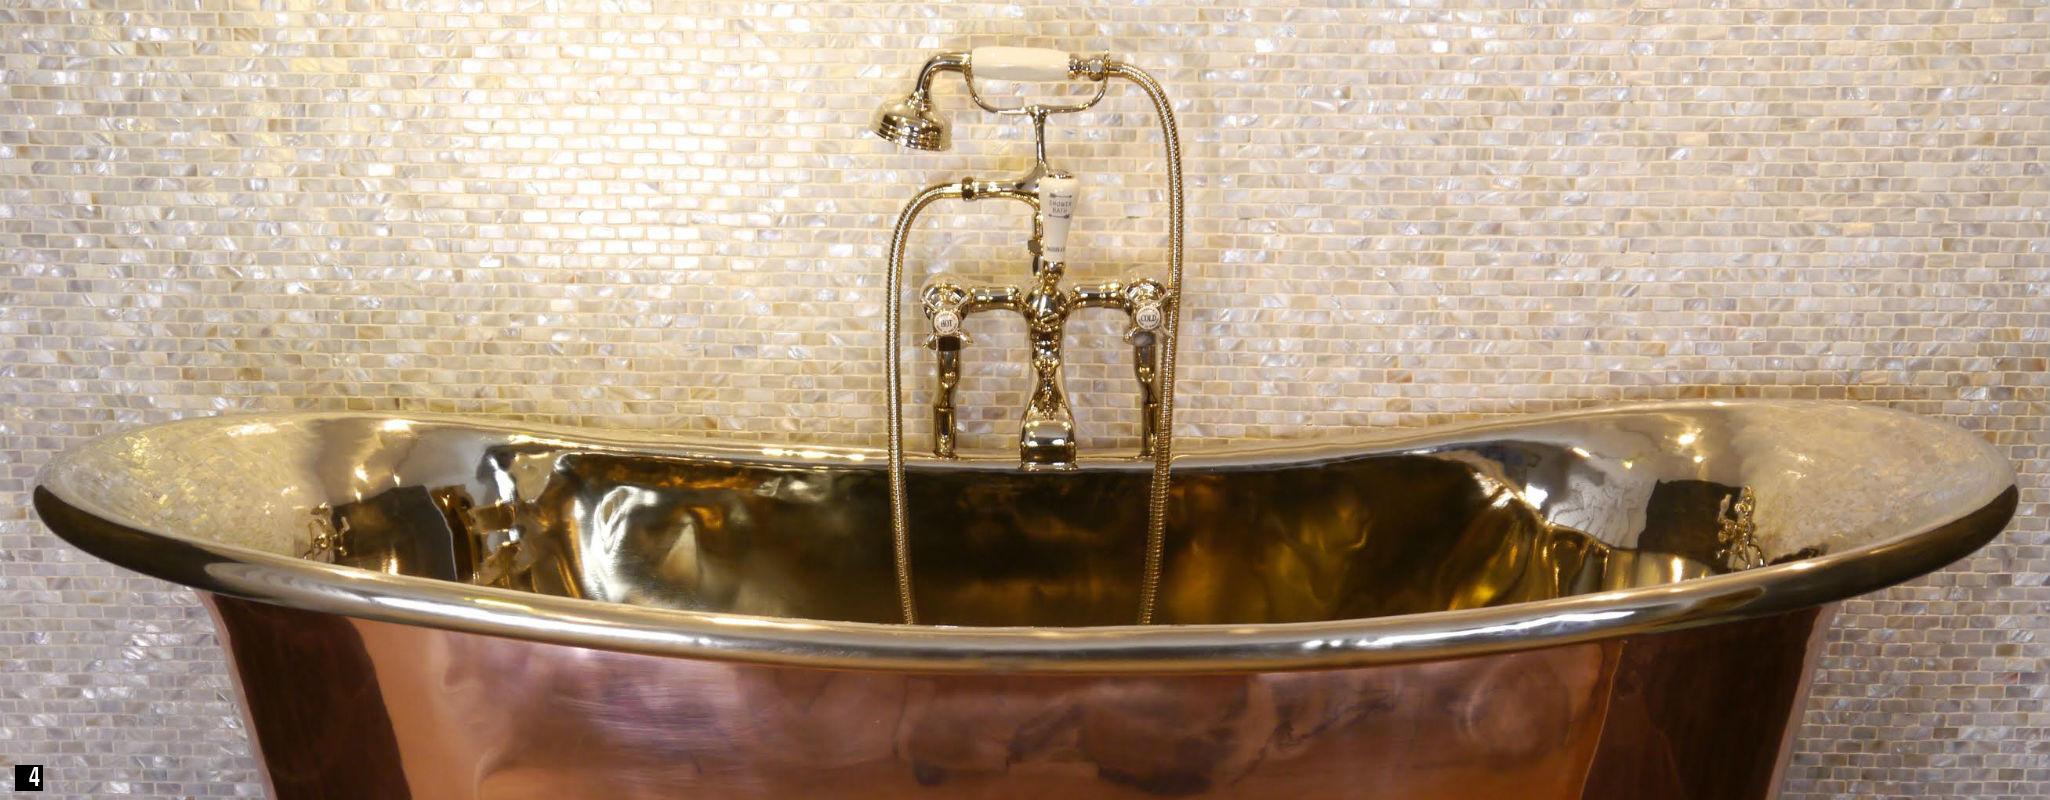 Copper and Nickel Roll Top Bath with Nickel Bath fittings